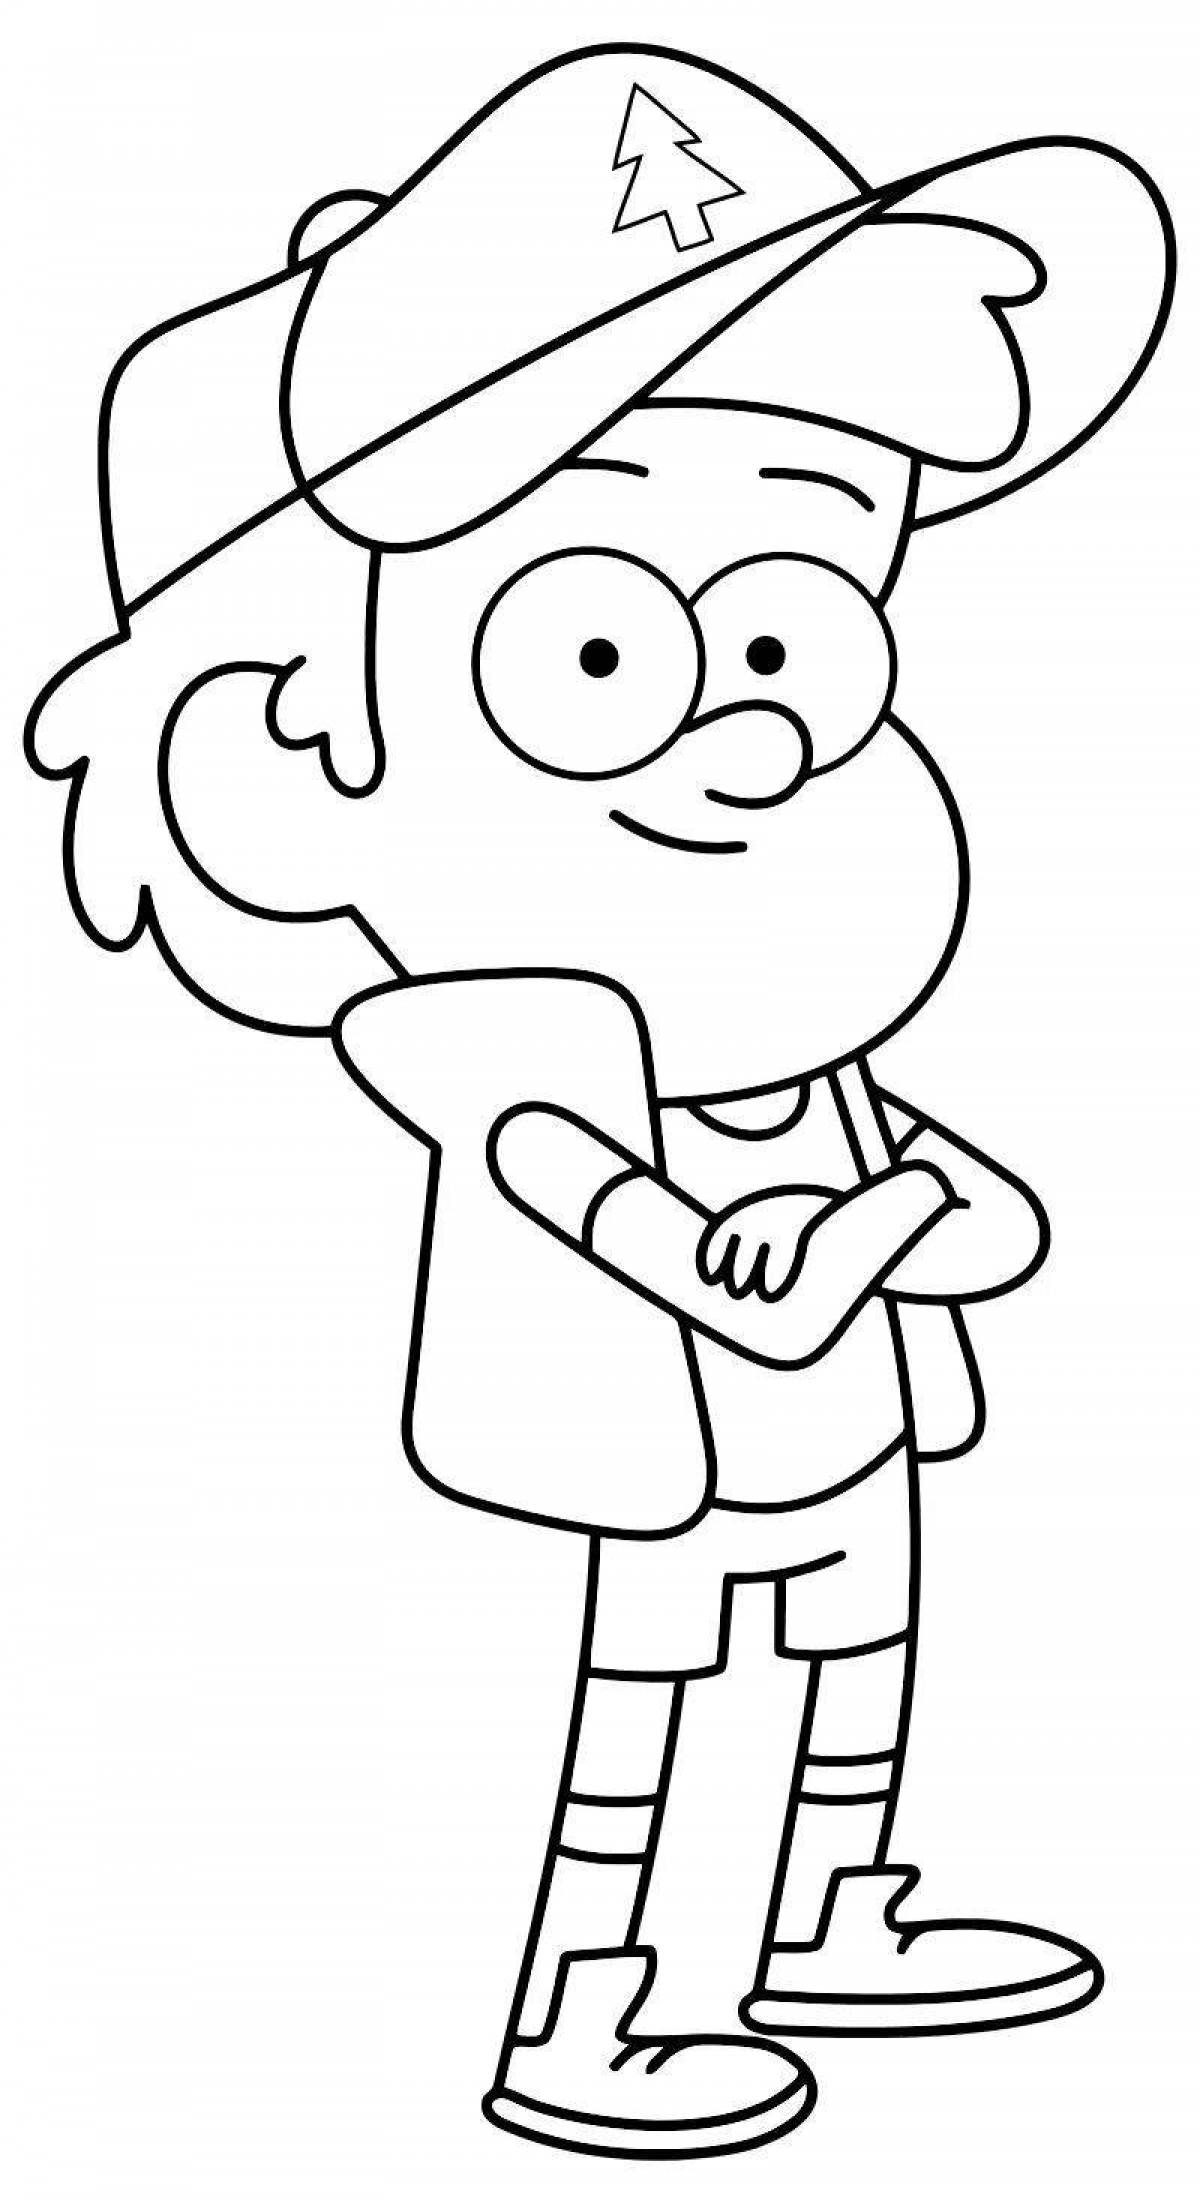 Gravity falls pictures #6